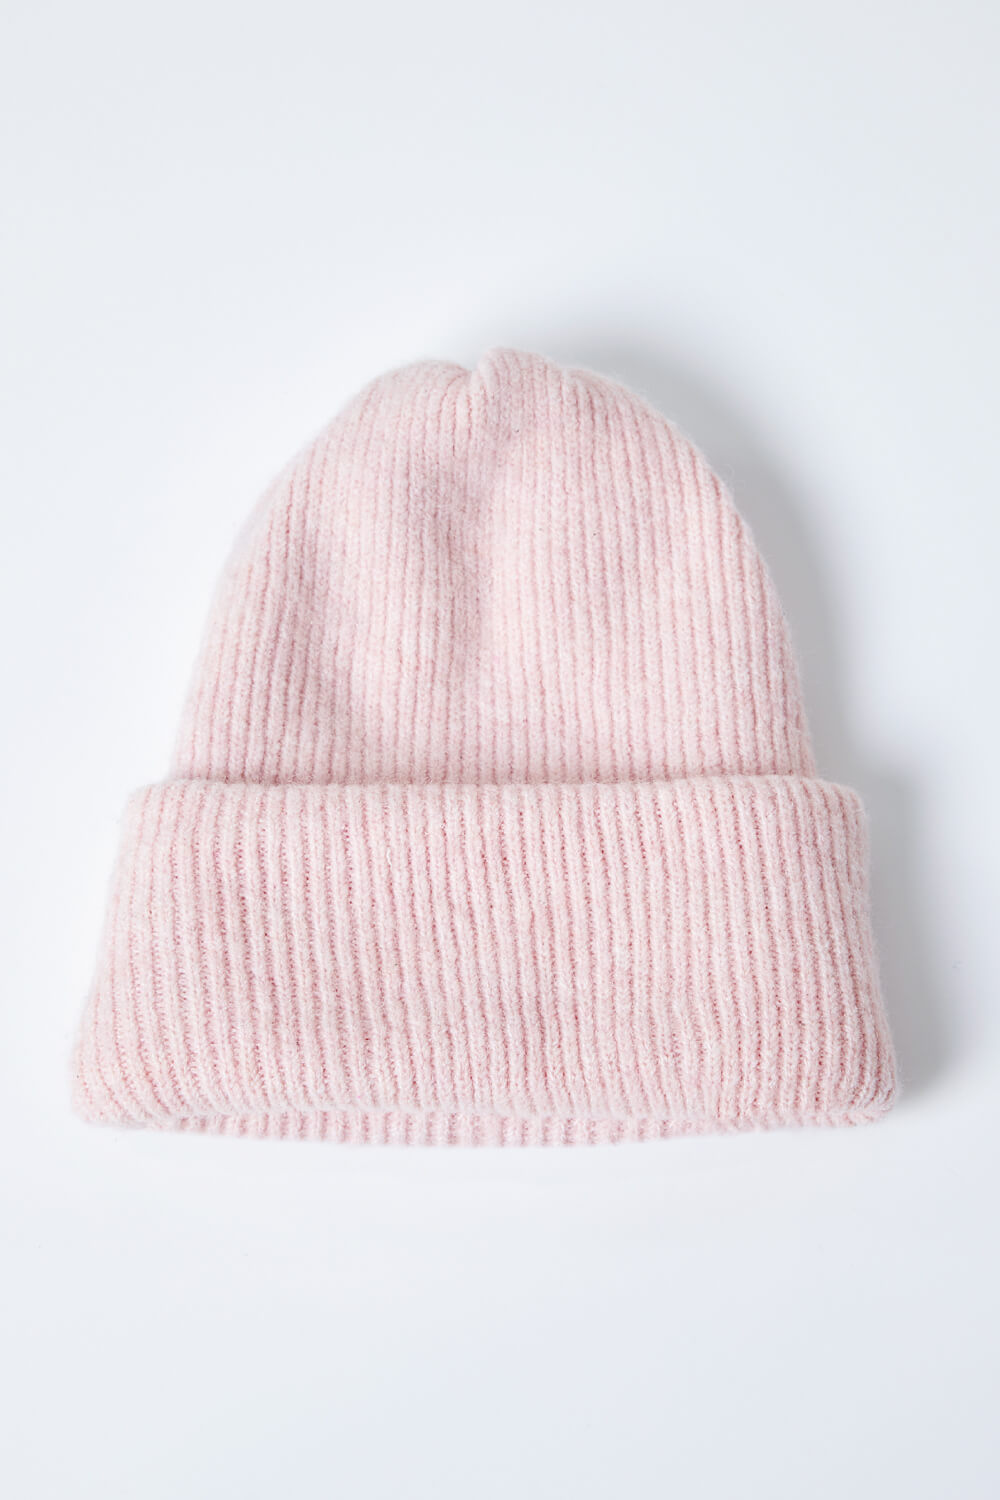 Light Pink Soft Ribbed Stretch Knit Hat, Image 5 of 5